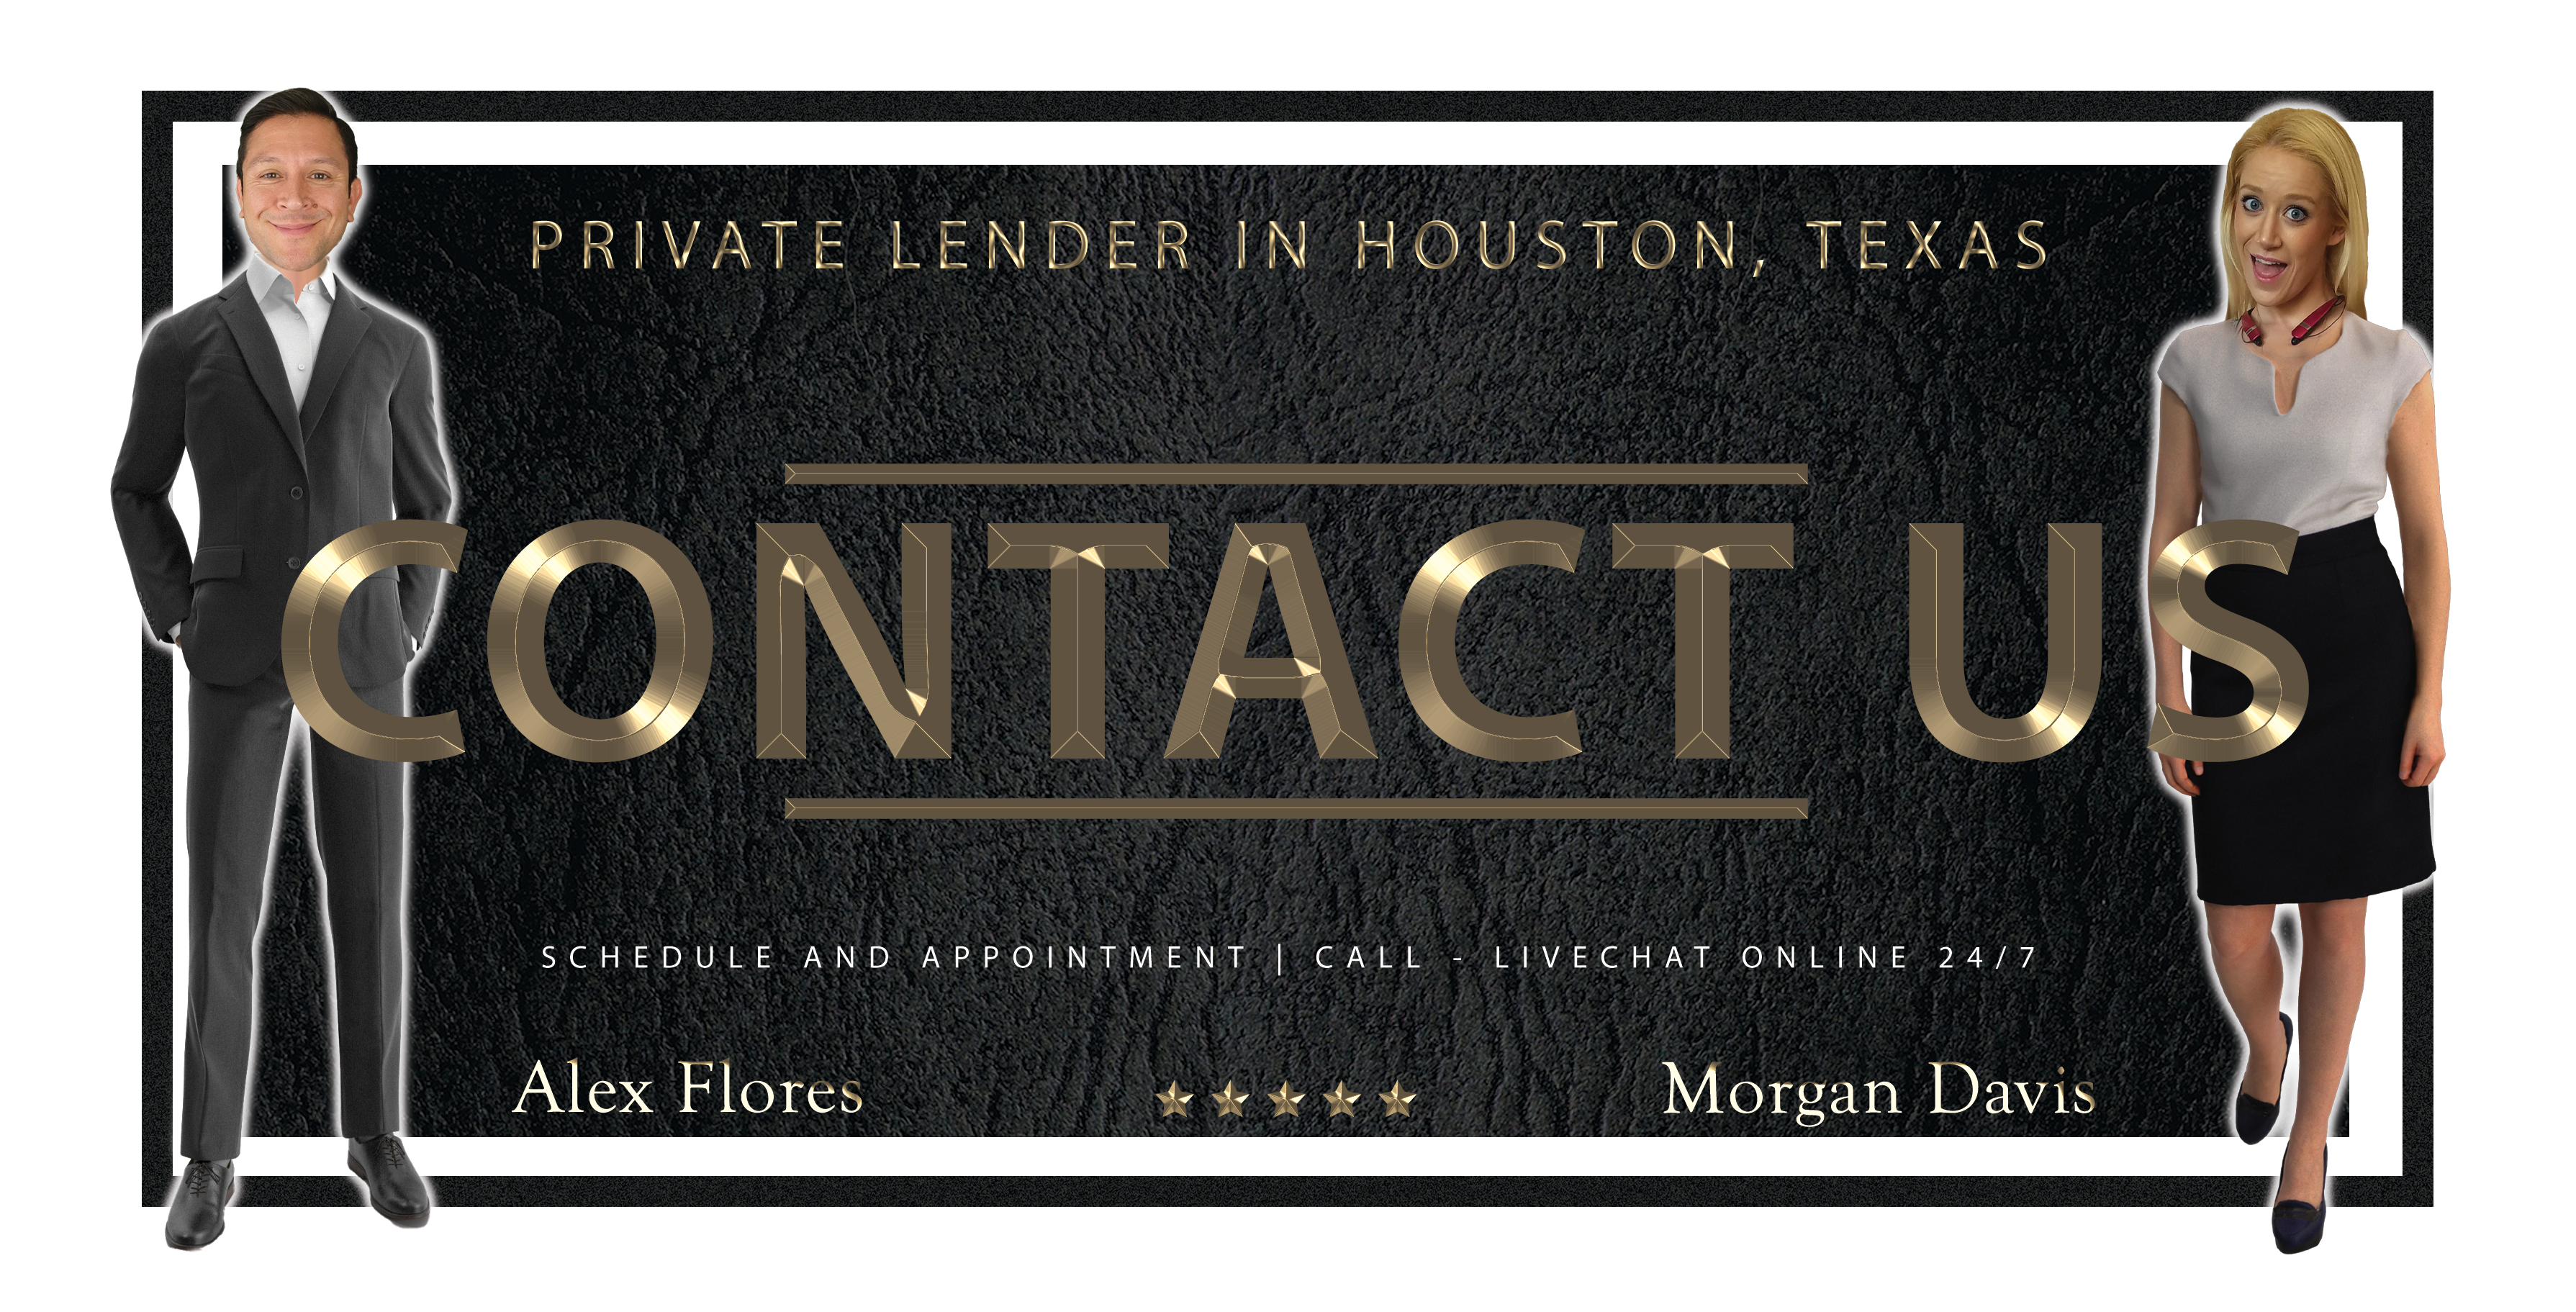 contact your private lender for real estate investments in houston texas